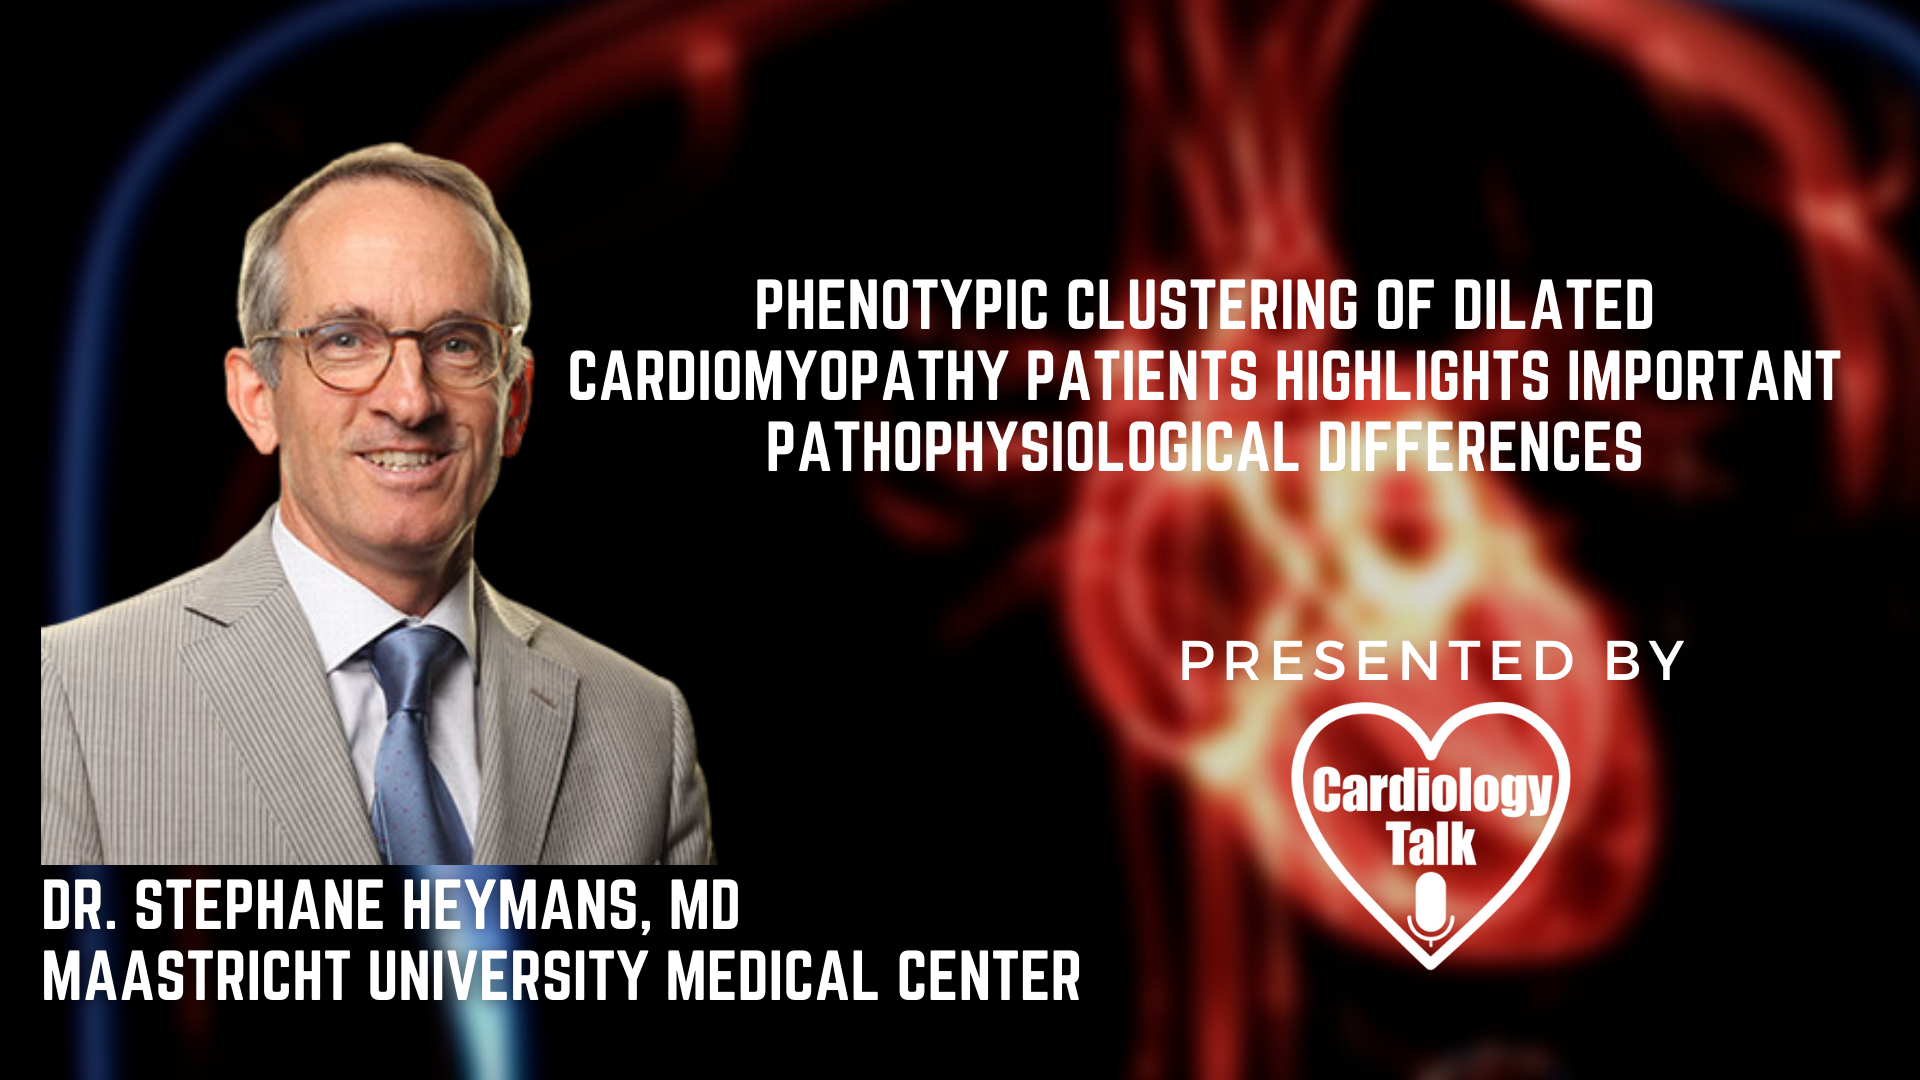 Dr. Stephane Heymans, MD- Phenotypic clustering of dilated cardiomyopathy patients highlights important pathophysiological differences